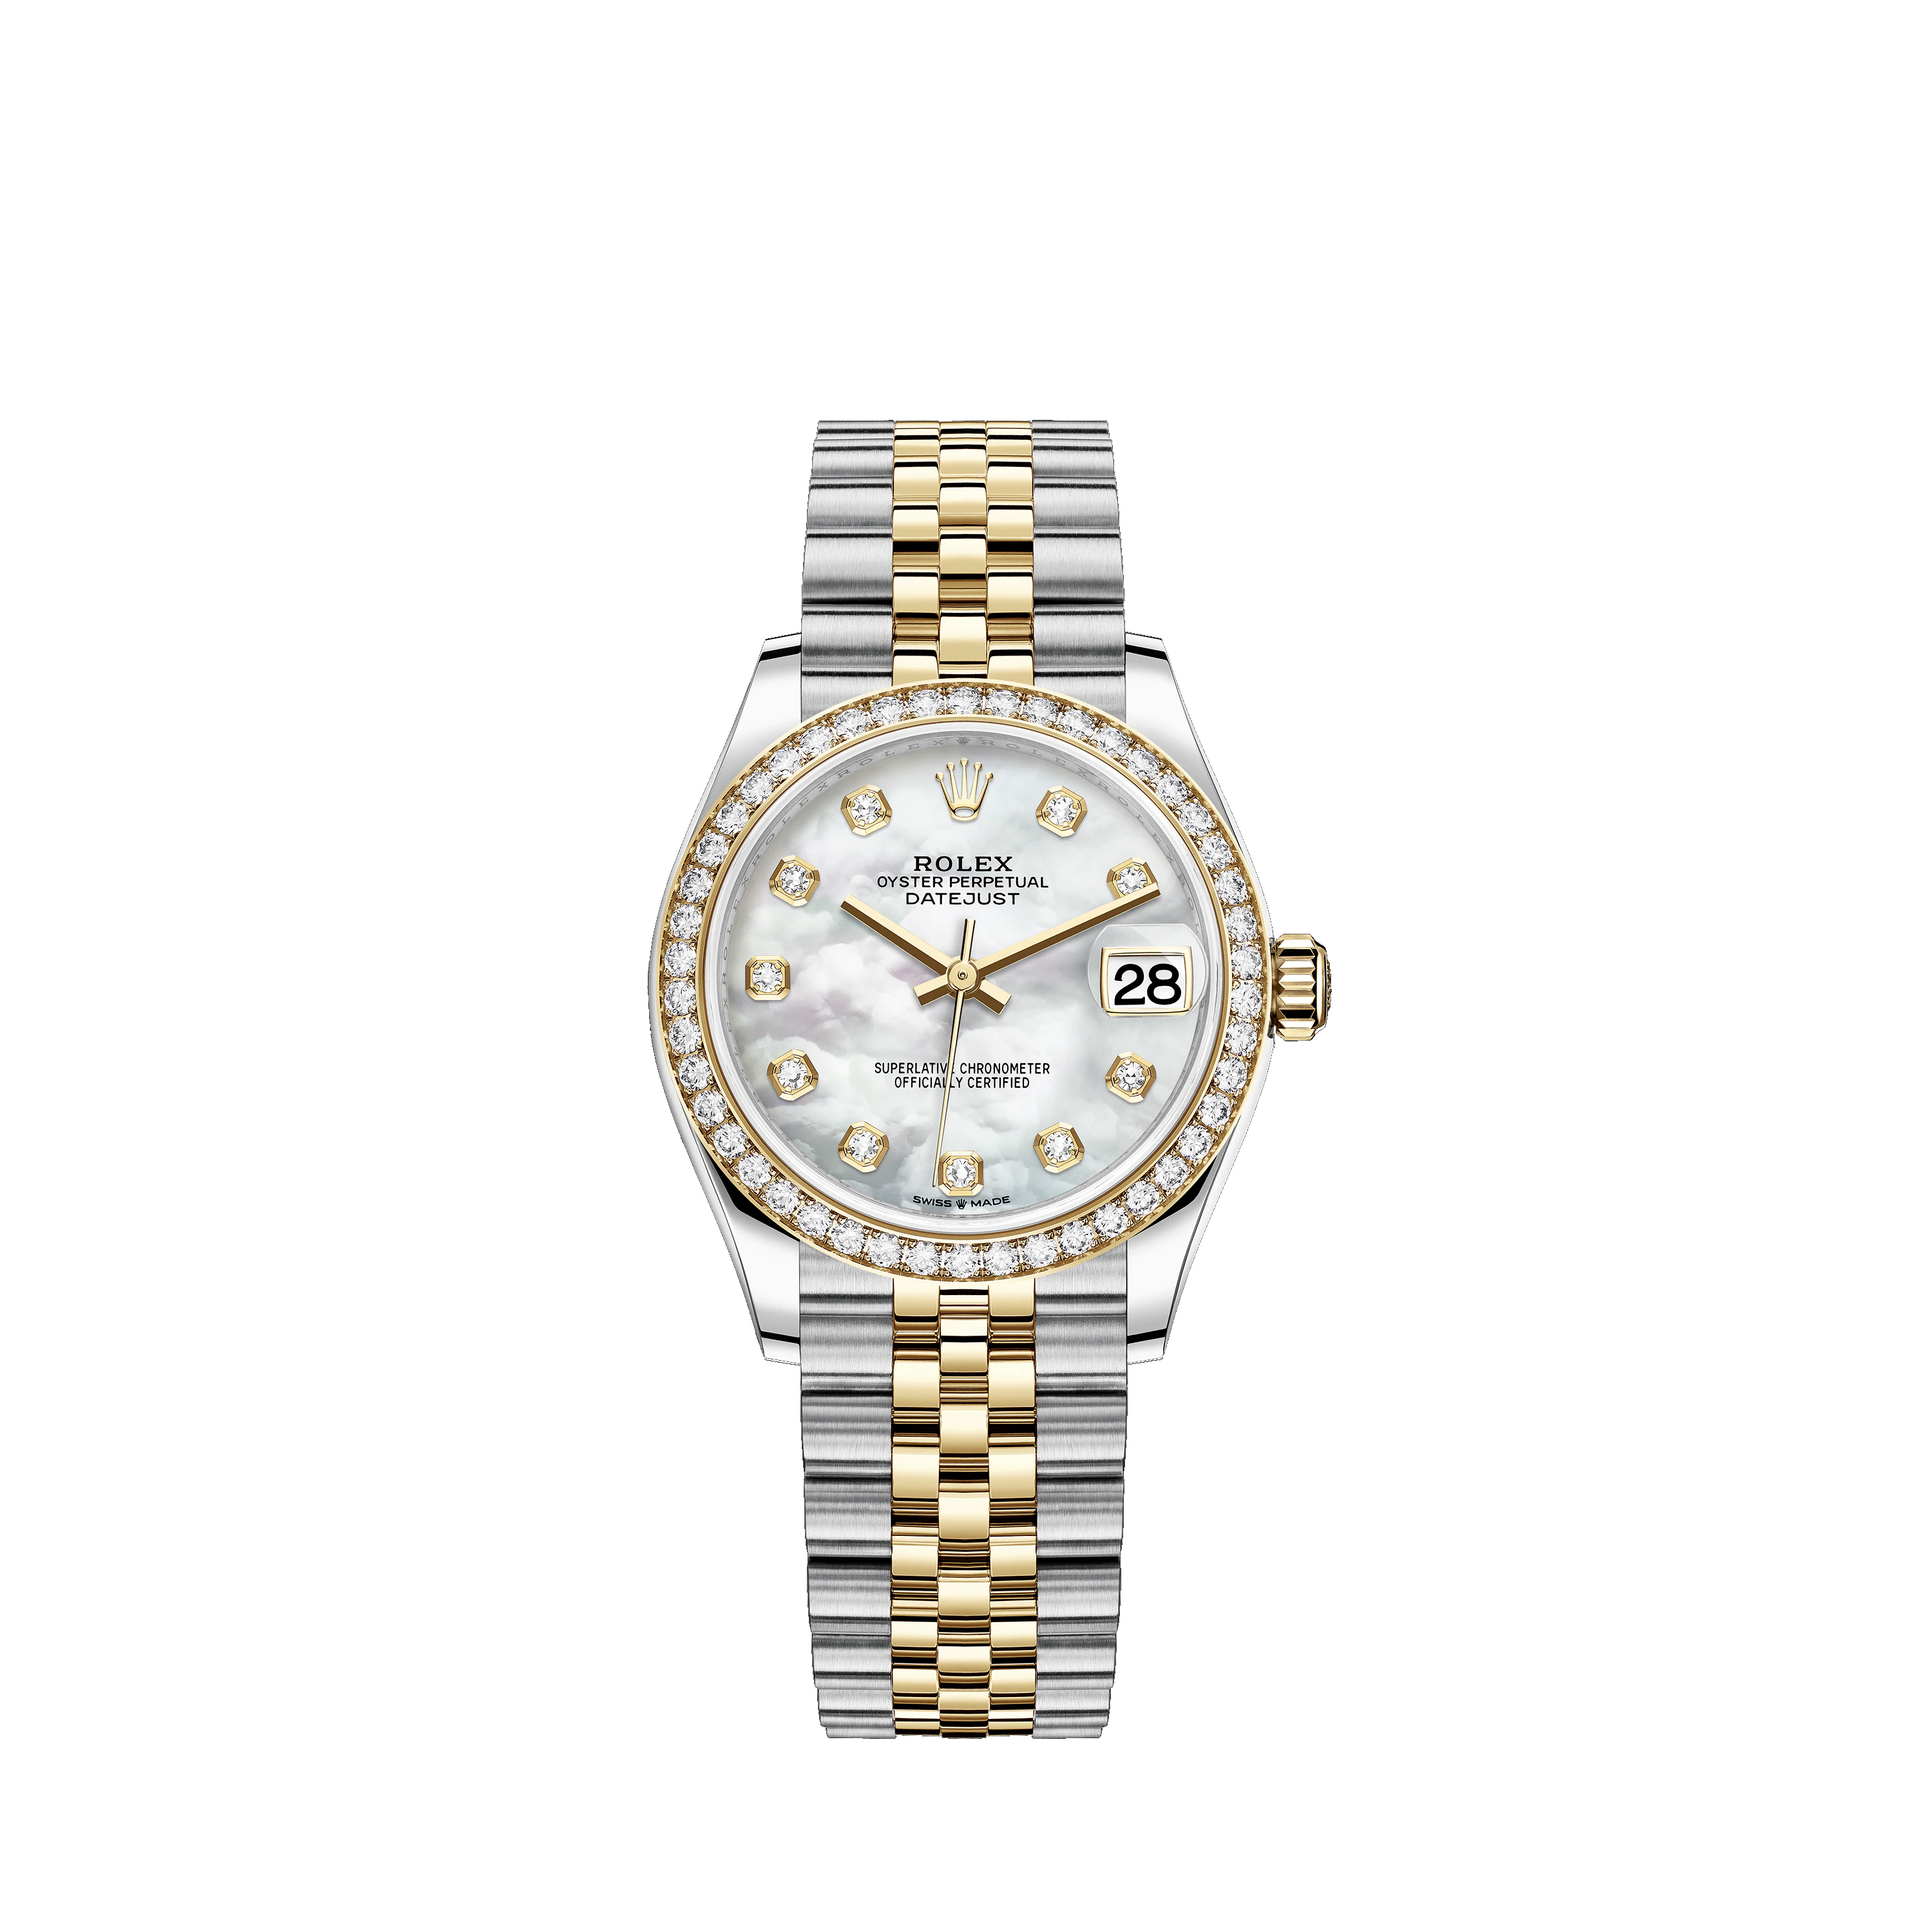 Datejust 31 278383RBR Gold & Stainless Steel Watch (White Mother-of-Pearl Set with Diamonds)